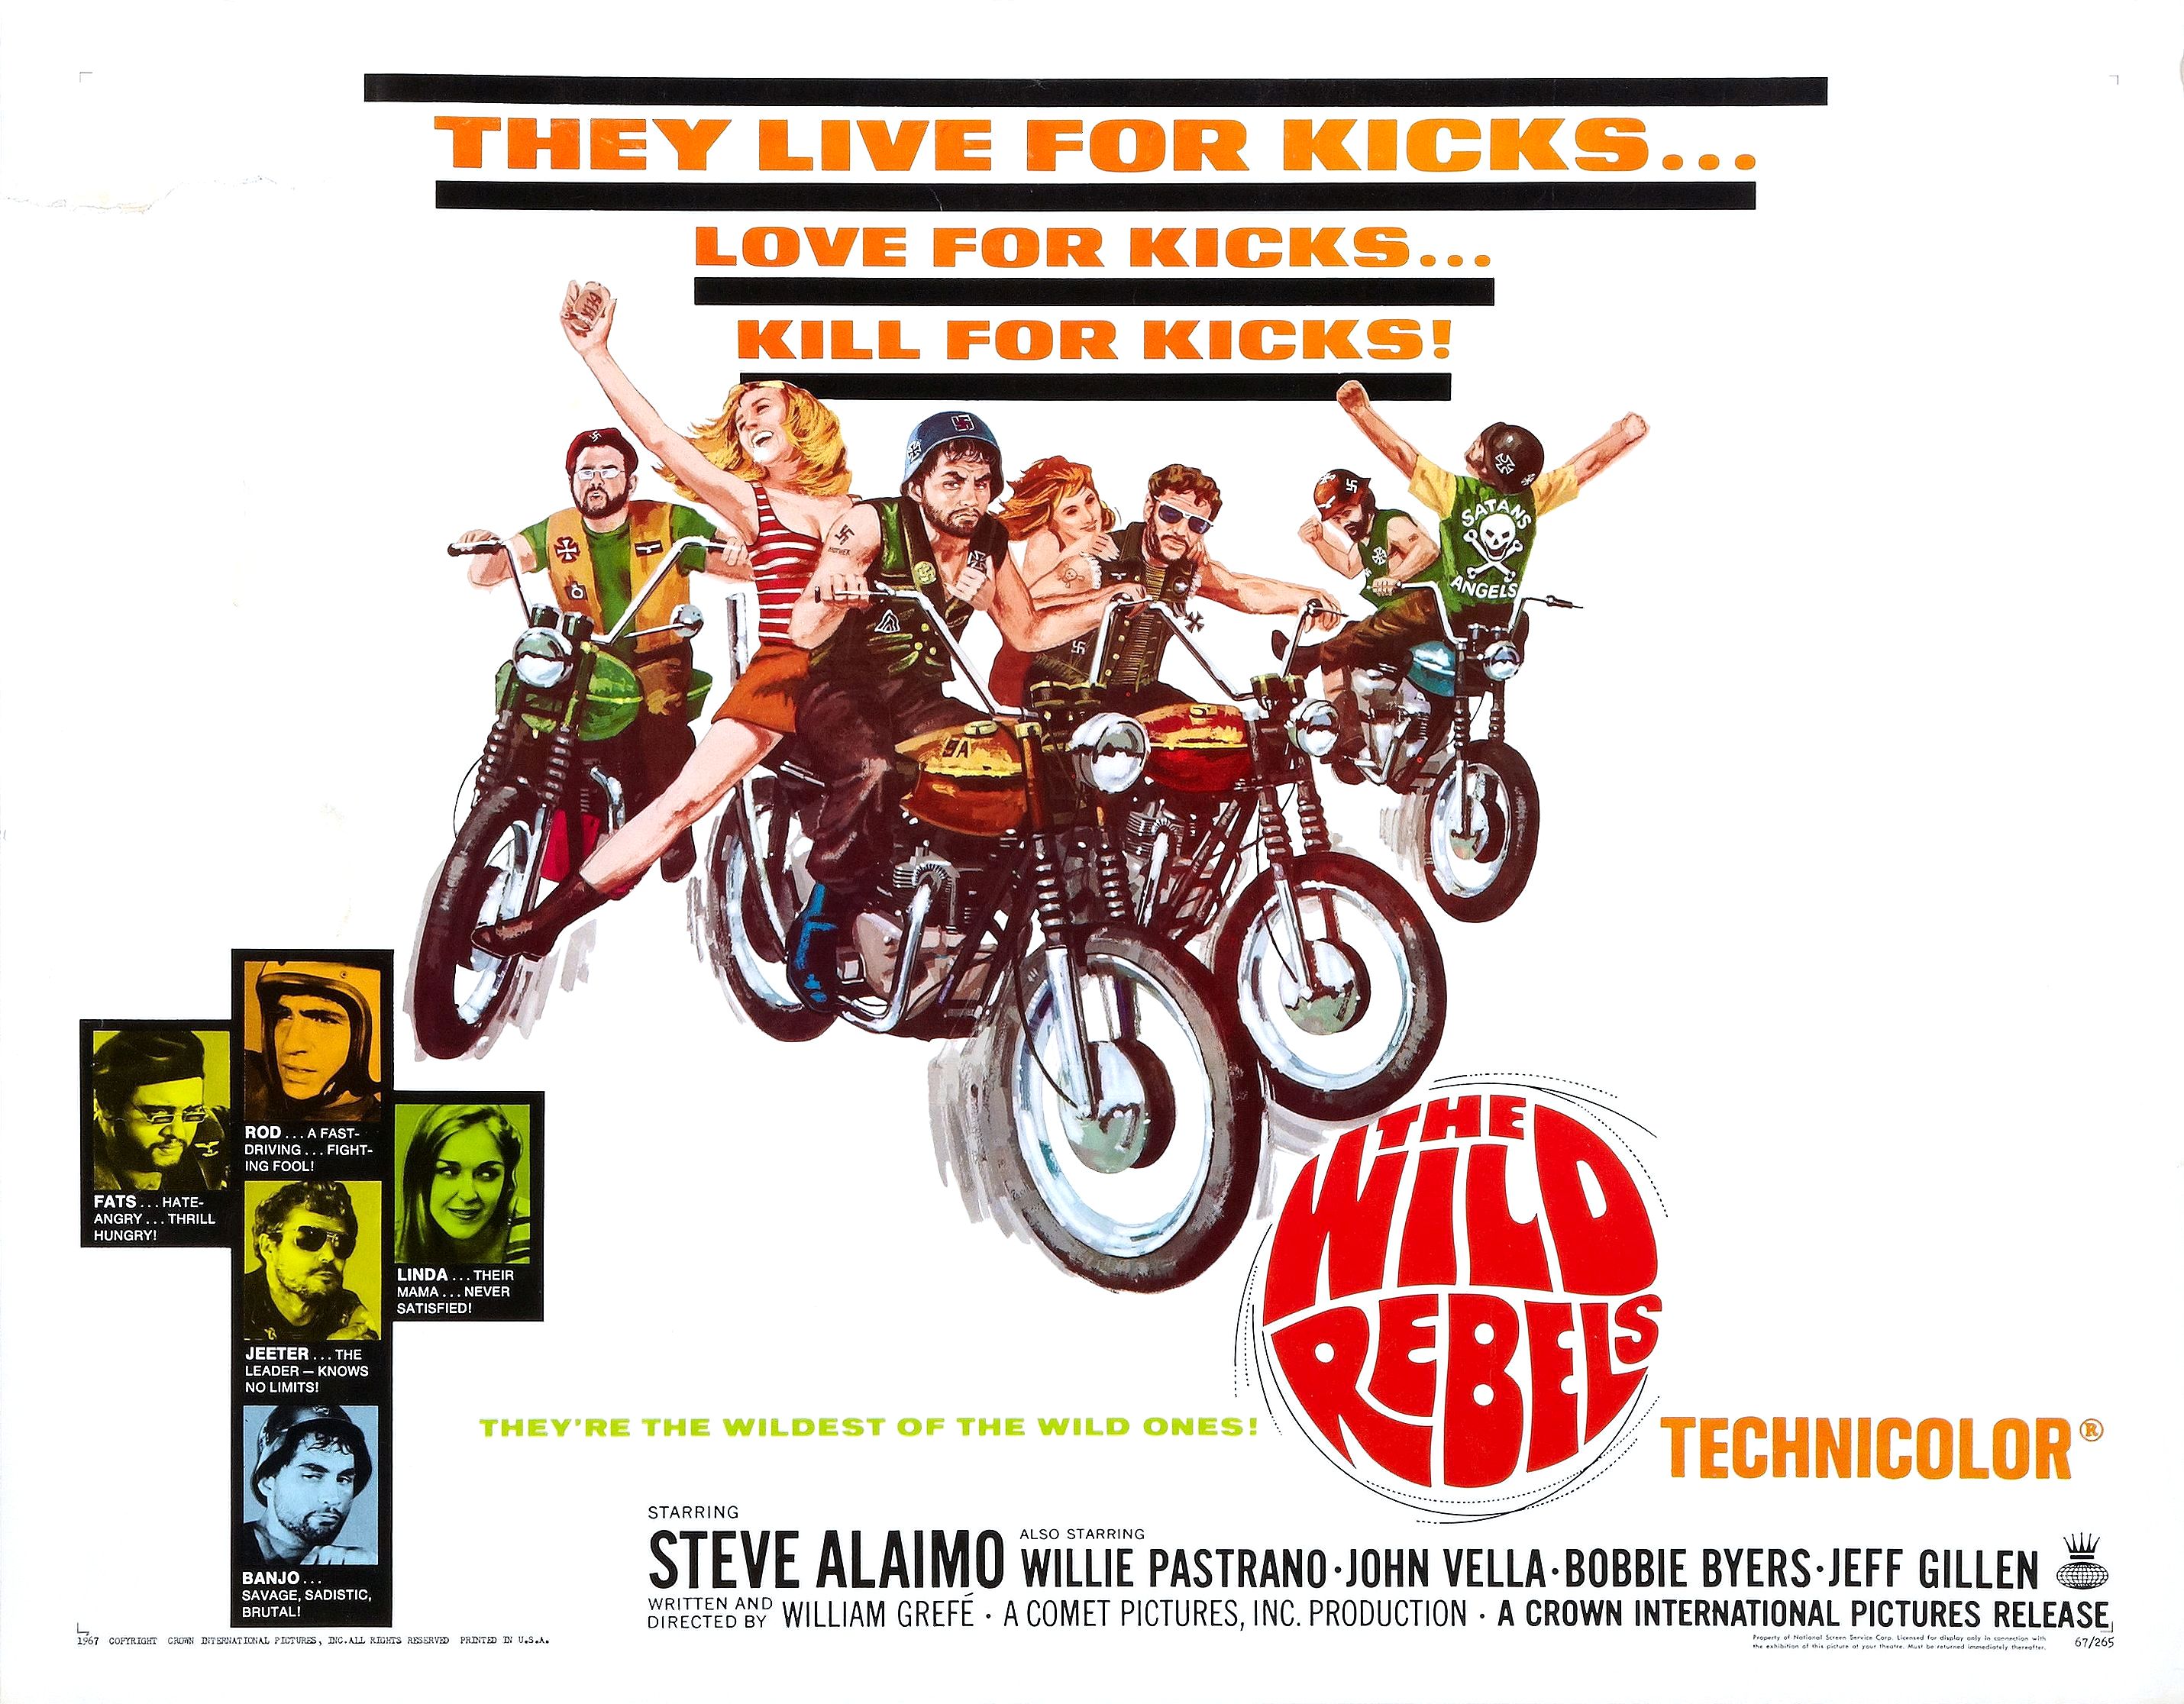 wild rebels (1967) - They Live For Kicks Love For Kicks... Kill For Kicks! Ve The Wildest Of The Wilo Ones Technicolor Steve Alaimo Willie Pastrano John VellaBobbie Byers Jeff Gillen We William Gref. A Comet Pictures, Inc. Production A Crown International